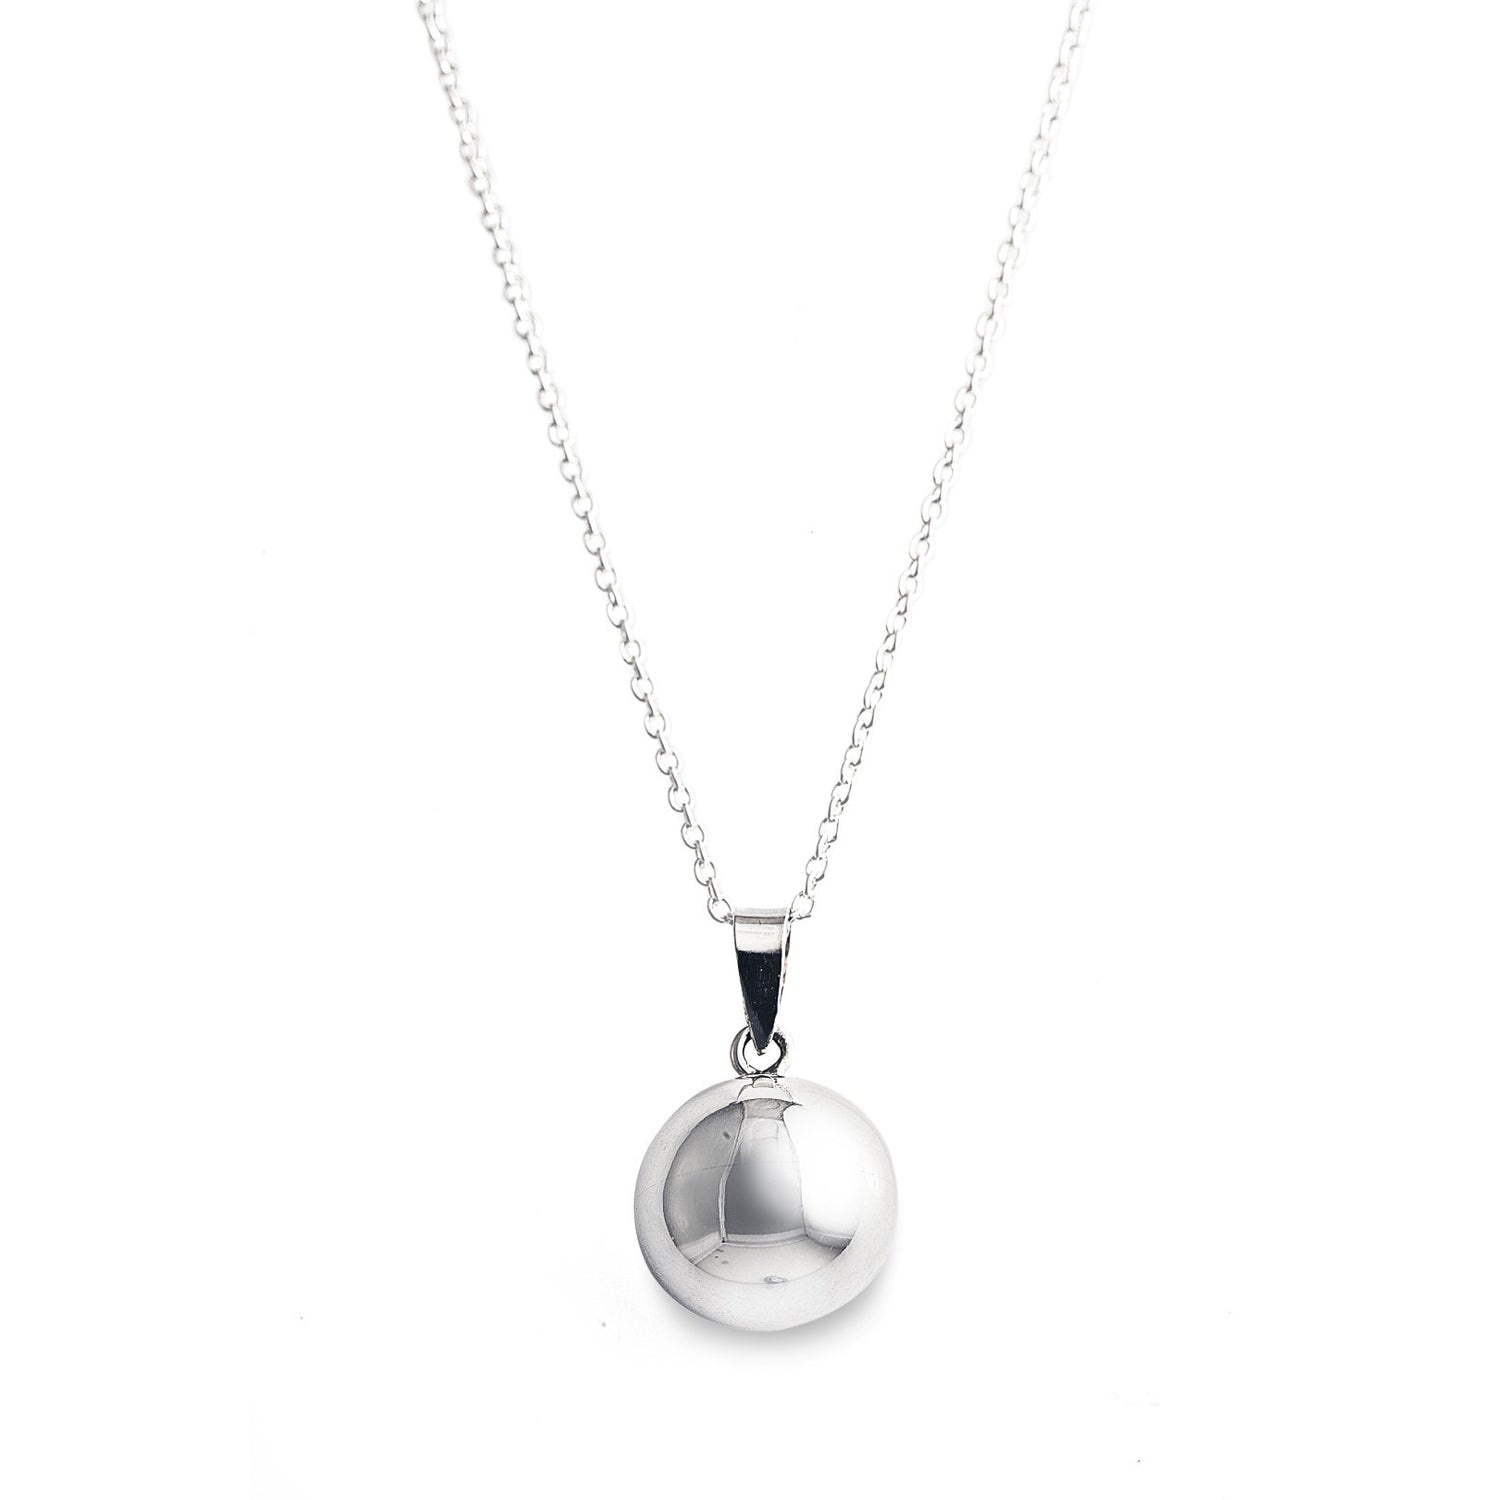 Small Villa Necklace Ball Pendant in 925 sterling silver with a fine silver chain. Worldwide shipping. Jewellery by Bellagio & Co.